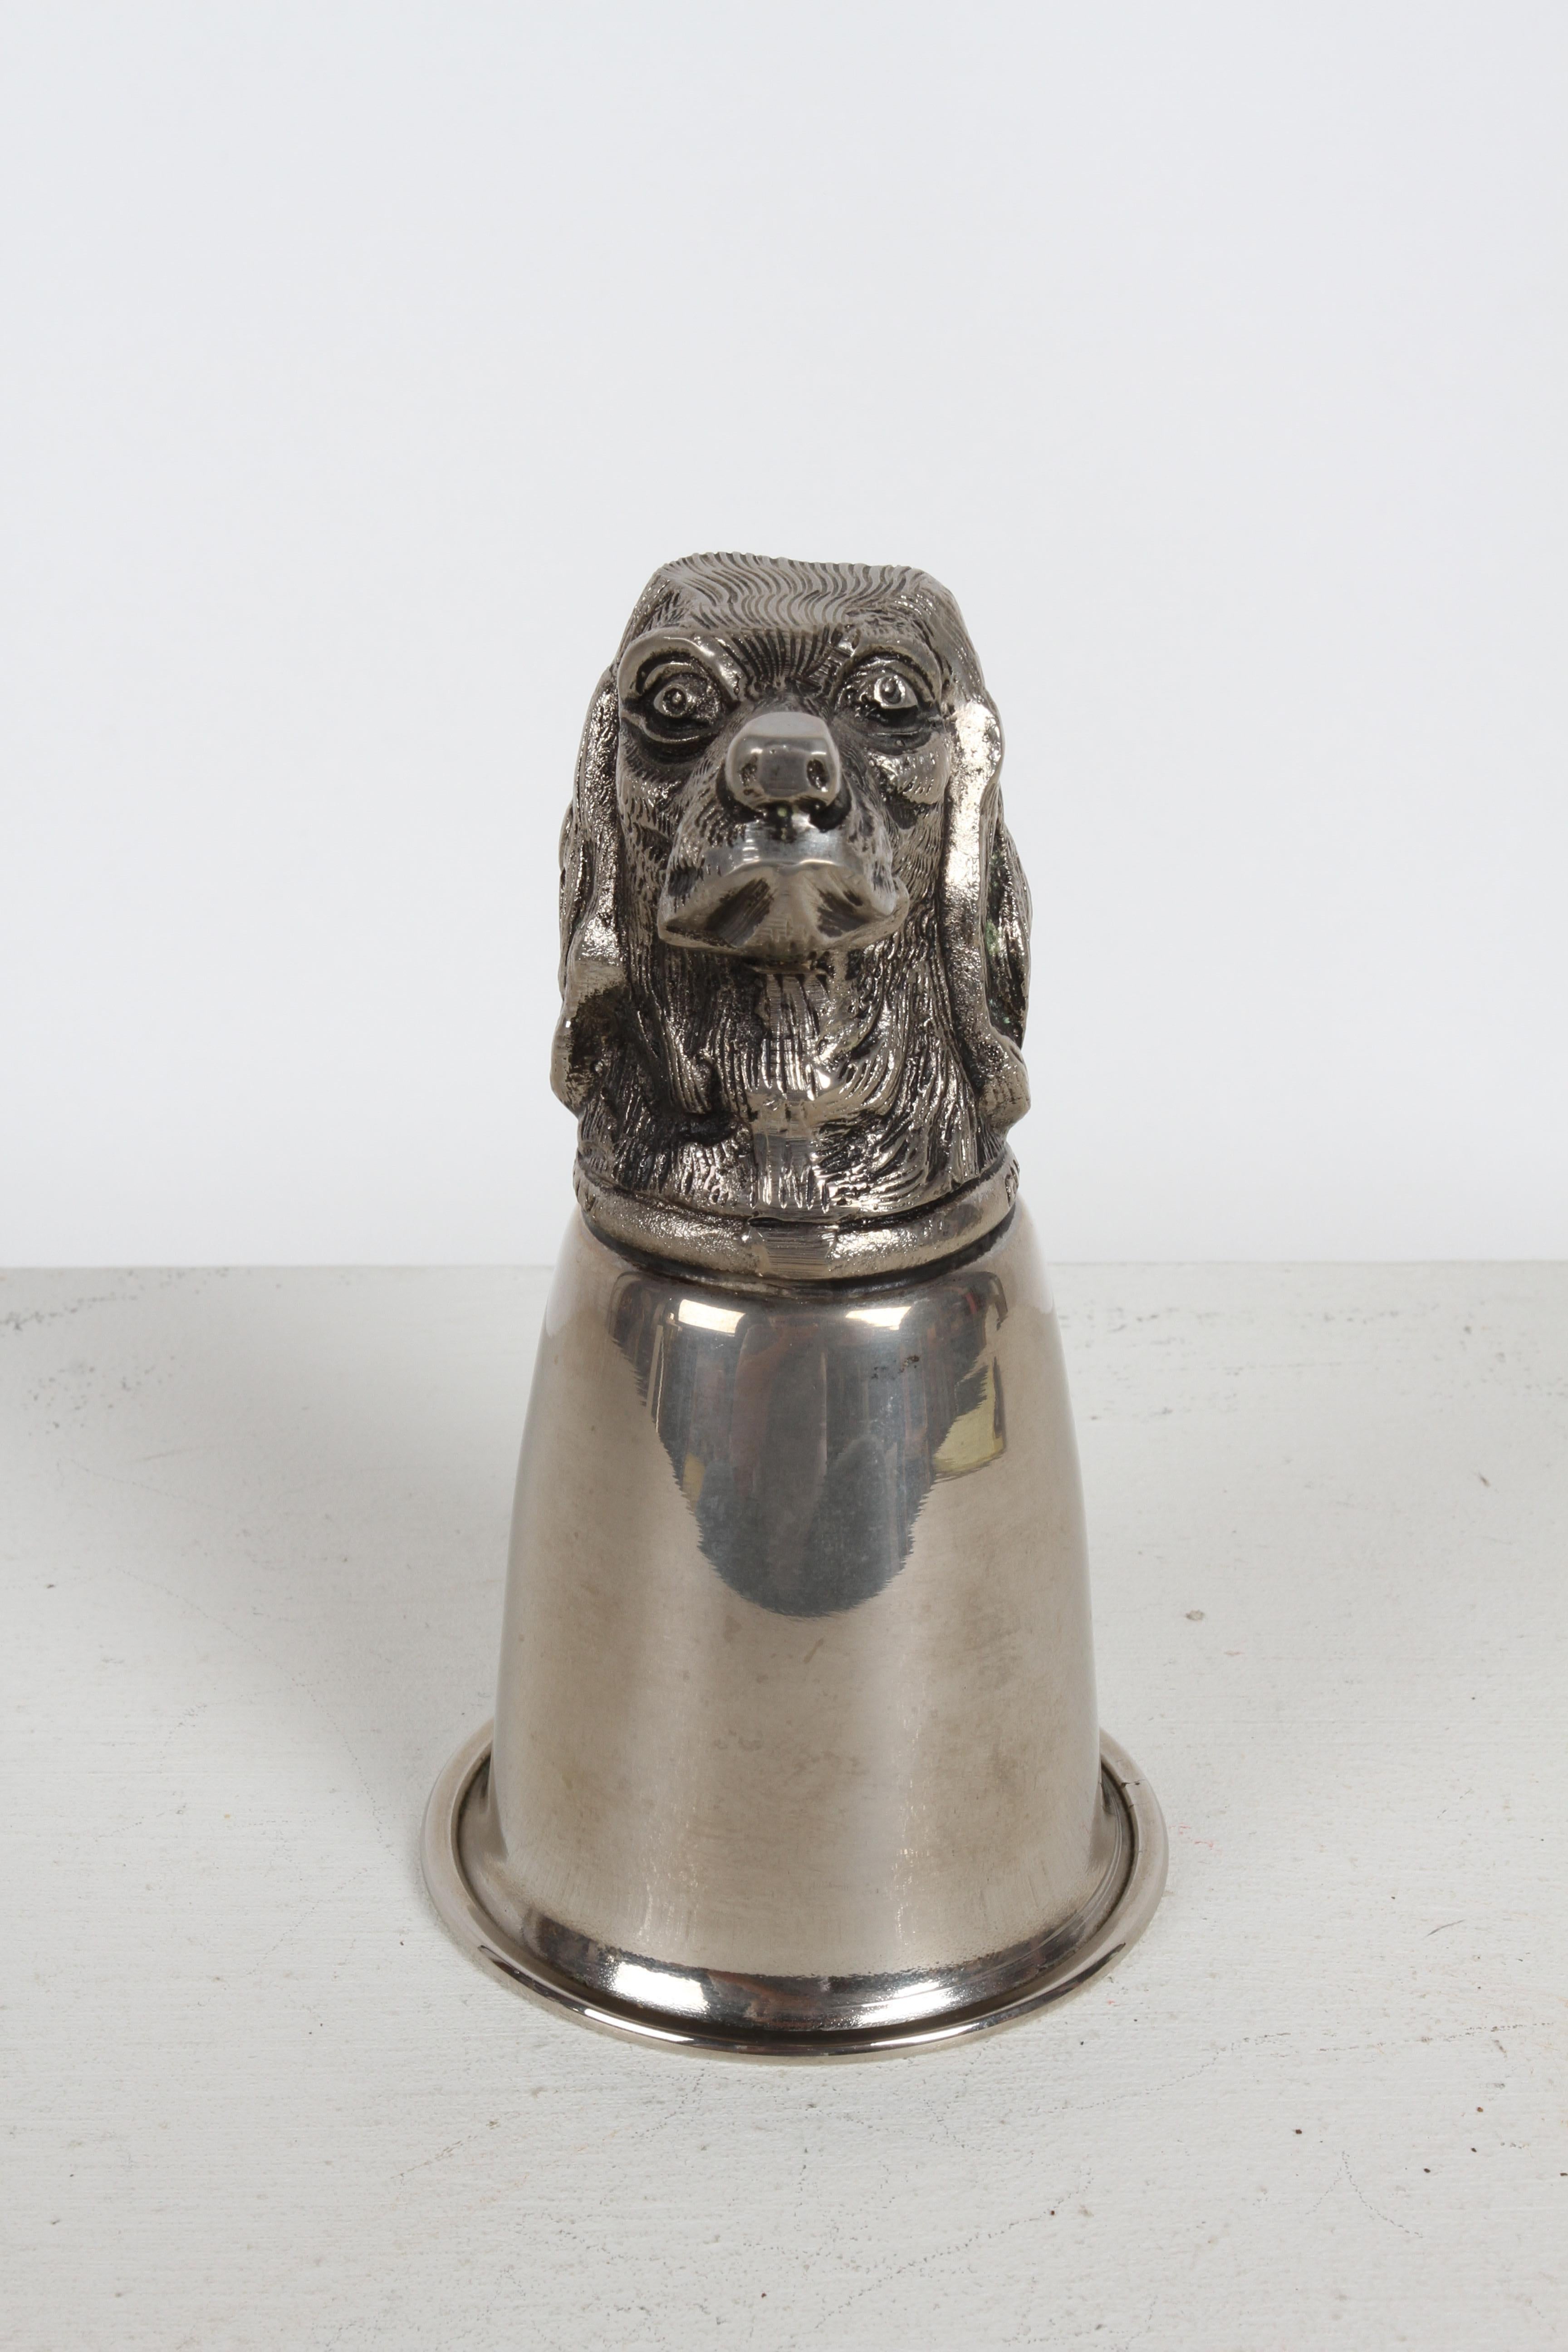 Circa 1970s Hallmarked Gucci - Italy Silver-Plated Dog Head (English Pointer) hunting equestrian theme stirrup cup. This drinking / vessel cup can rest on the head or be displayed turned over with the head clearly visible, as a sculpture or little